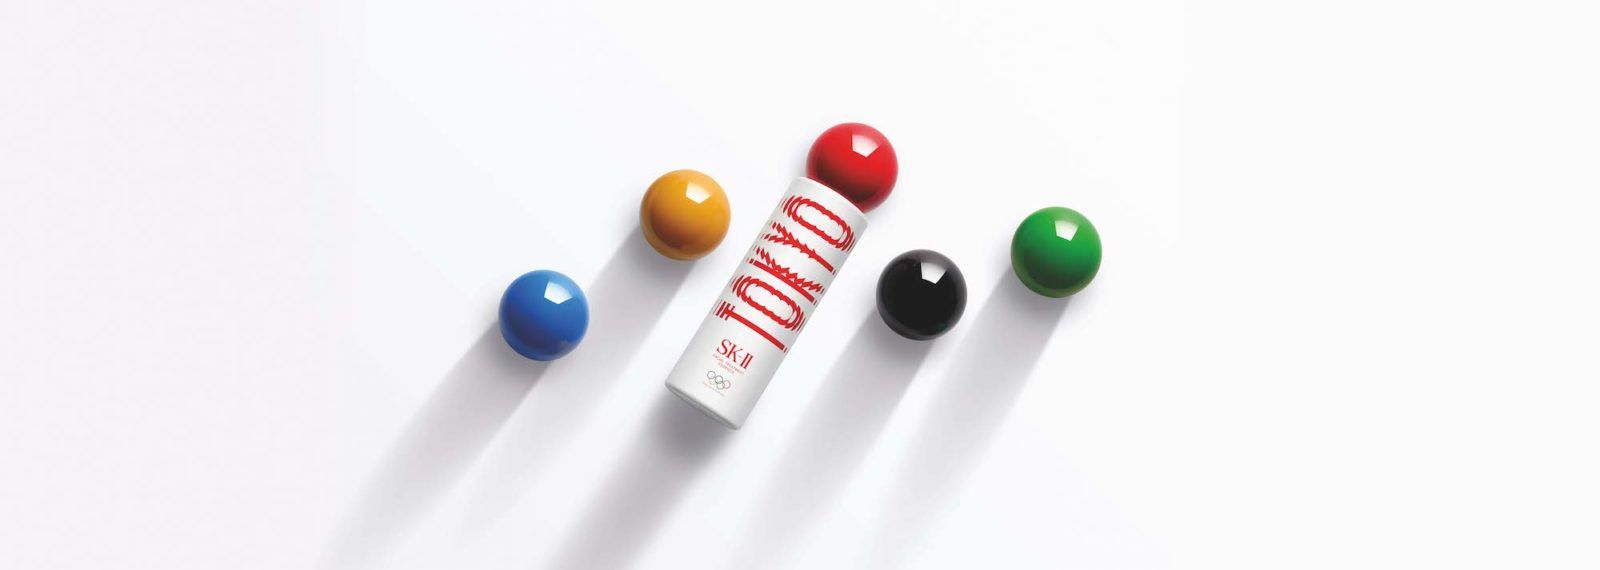 Your favourite SK-II Pitera Essence returns with a fresh look for the Tokyo Olympics